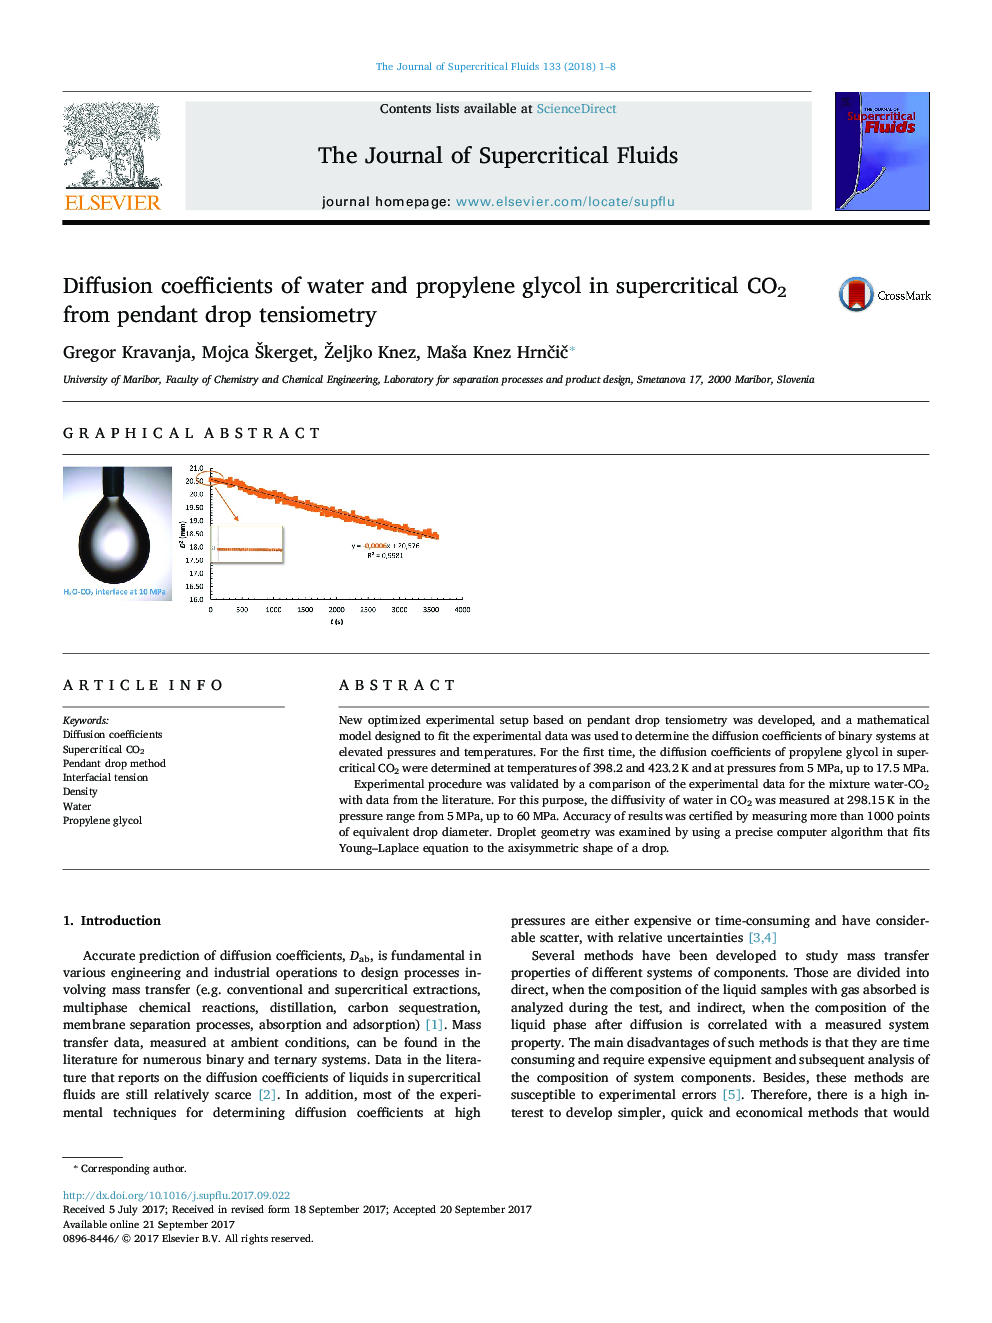 Diffusion coefficients of water and propylene glycol in supercritical CO2 from pendant drop tensiometry